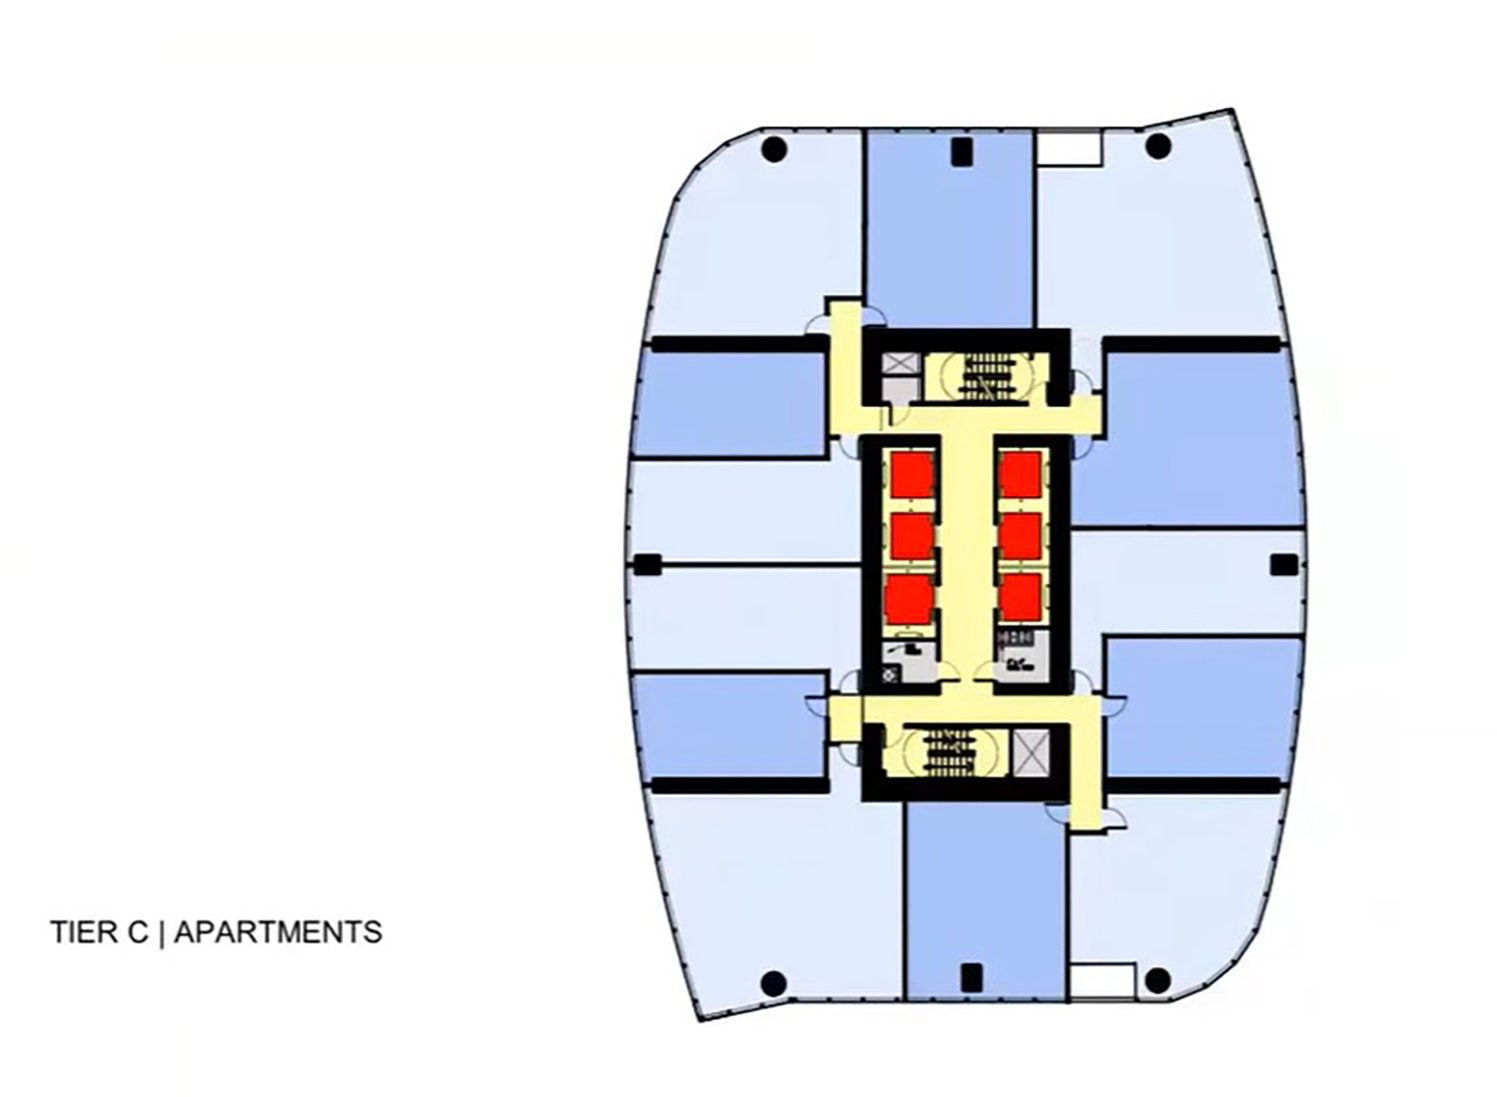 Typical Floor Plan for Tier C Apartments at 1000M. Drawing by JAHN